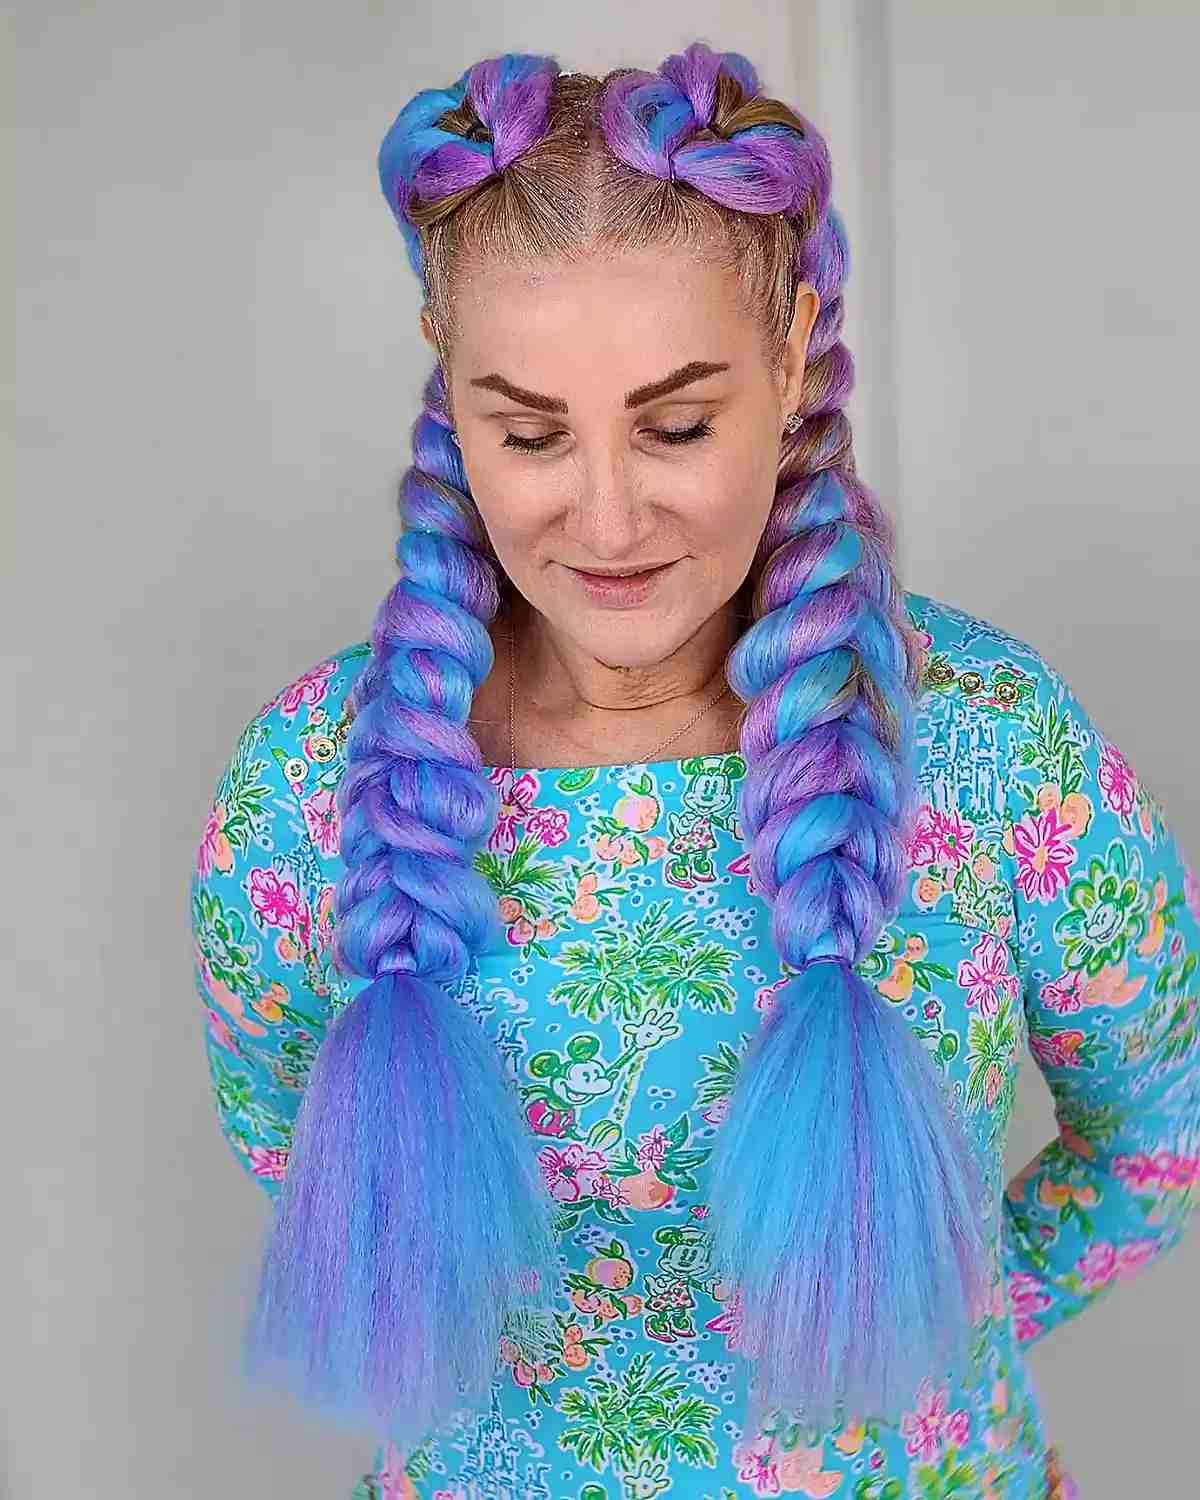 Blue and Violet Pull-Through Mermaid Braids for a Festival